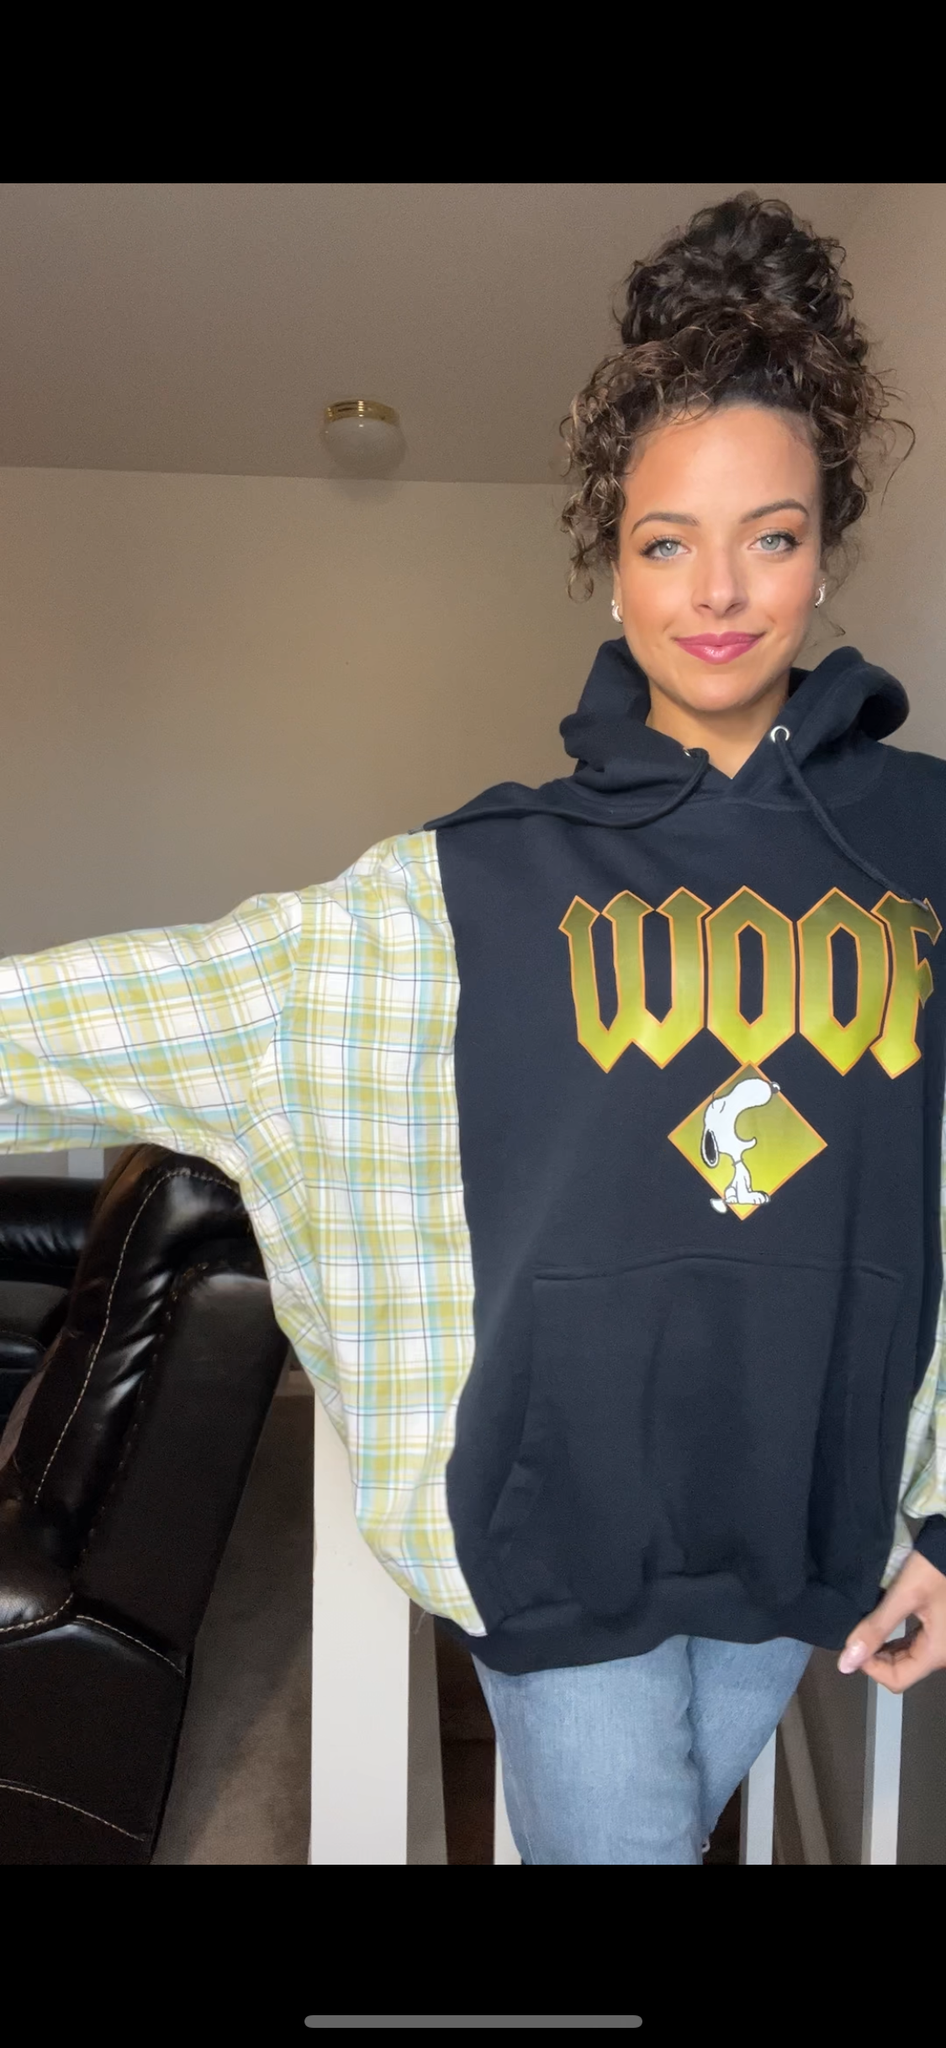 Upcycled ￼Woof - Women’s 3X – soft thick sweatshirt with cotton sleeves￼